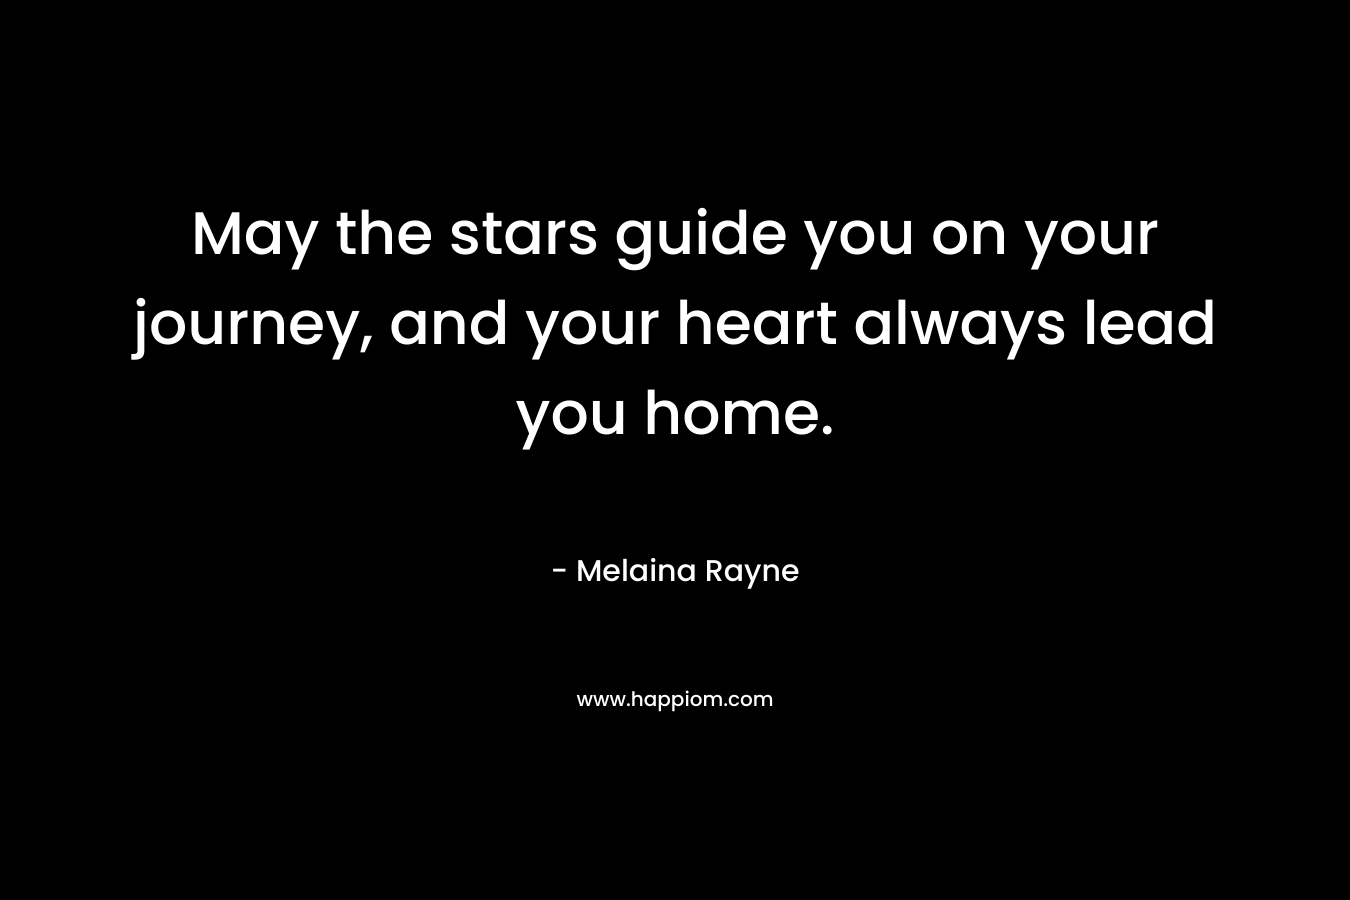 May the stars guide you on your journey, and your heart always lead you home.